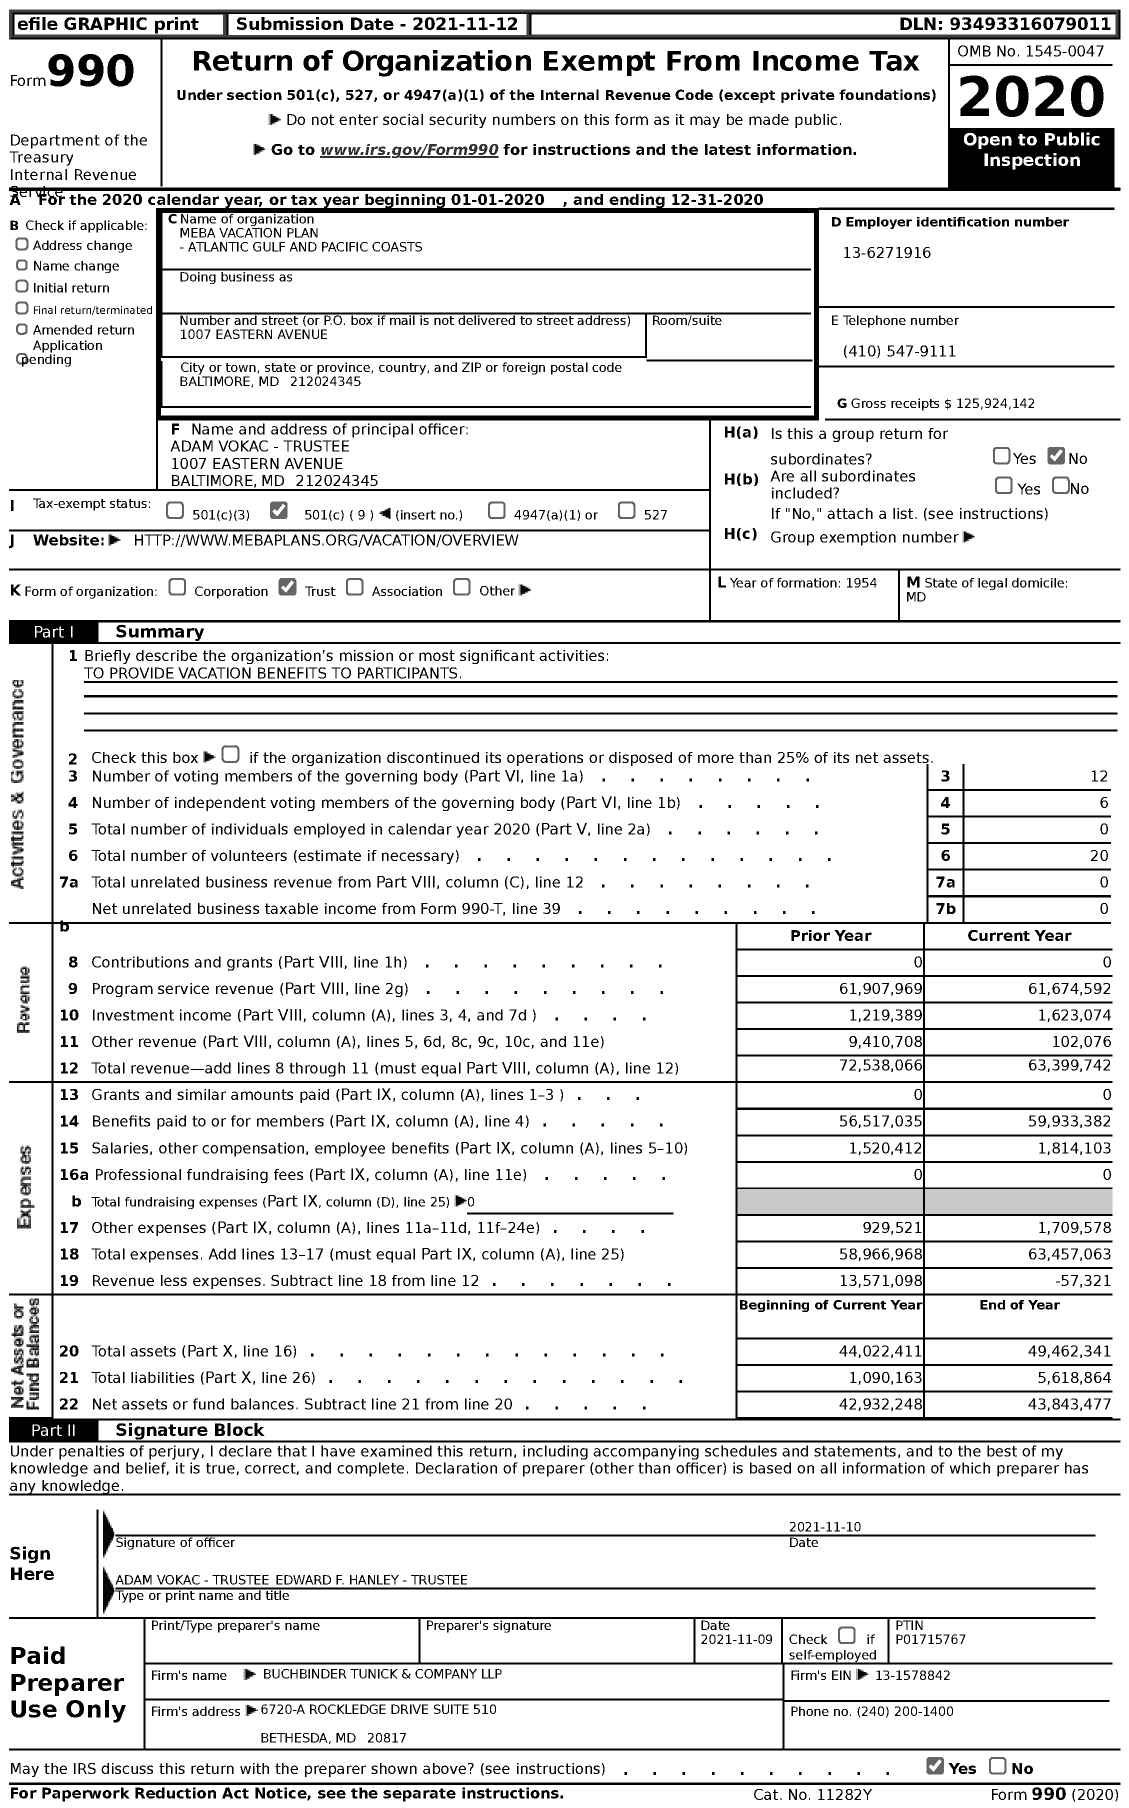 Image of first page of 2020 Form 990 for Meba Vacation Plan - Atlantic Gulf and Pacific Coasts